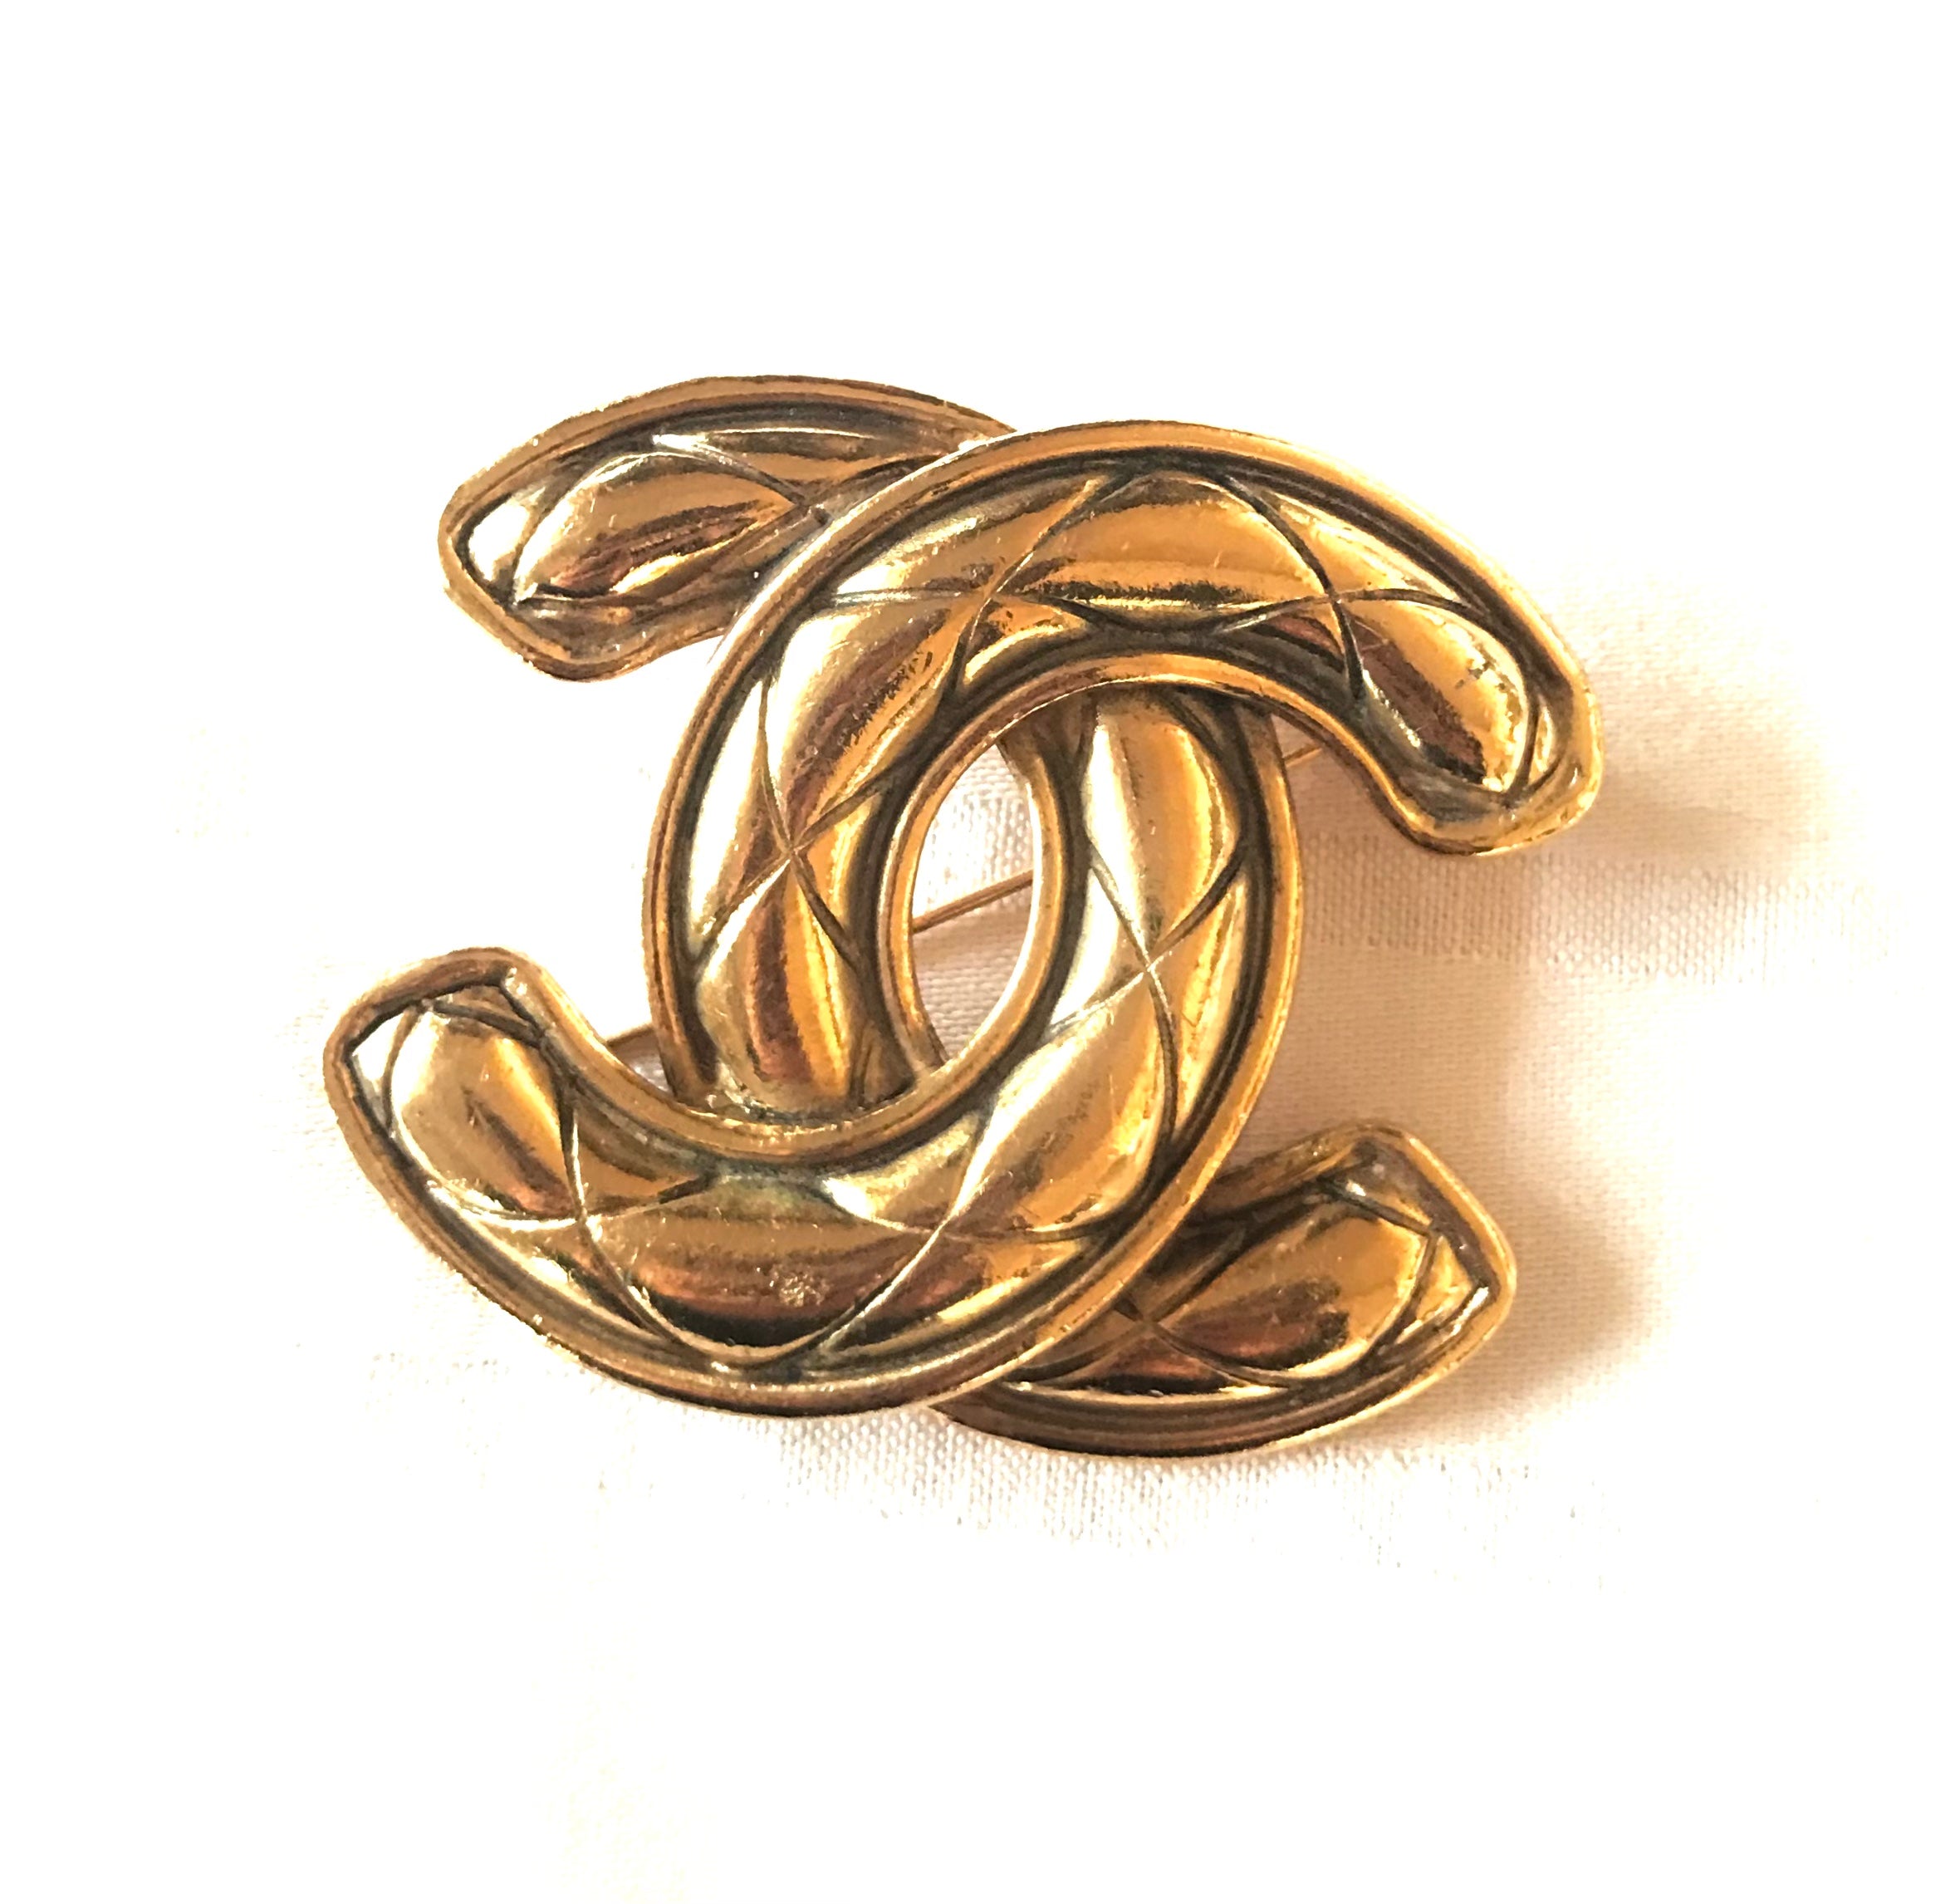 Vintage Chanel large matelasse CC brooch. Must have jewelry. Great